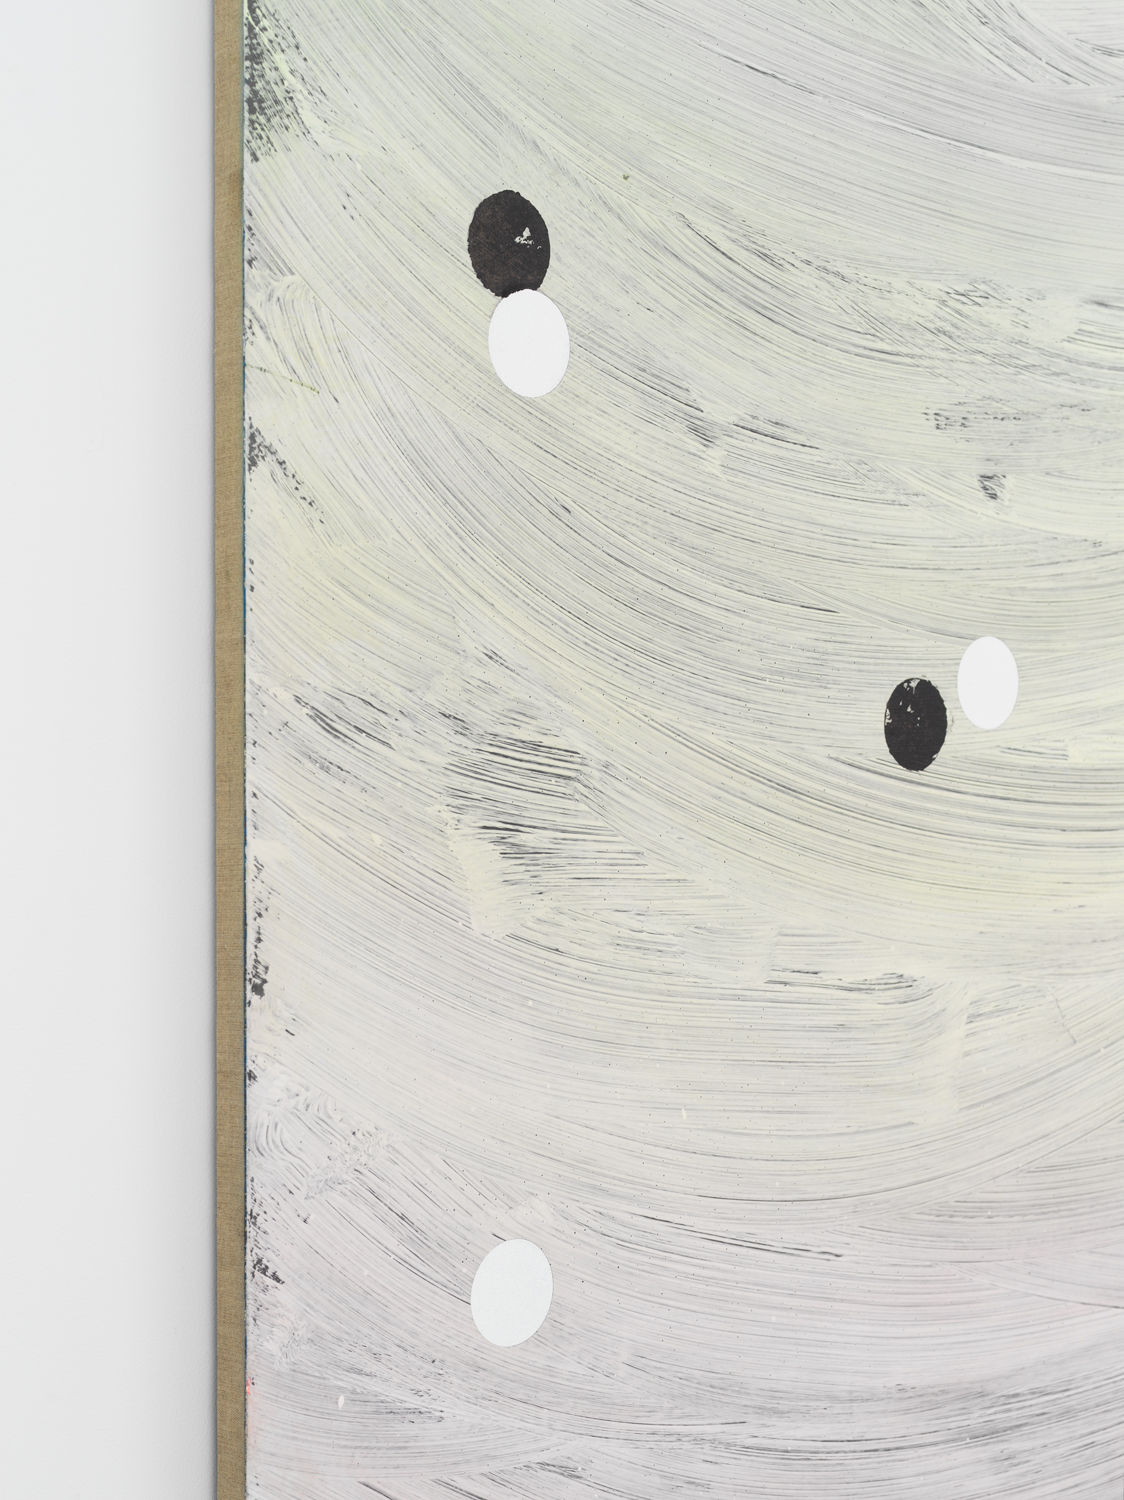 Alex Kwartler, Untitled detail, 2019, plaster, acrylic, and oil on linen, 72h x 48w in.